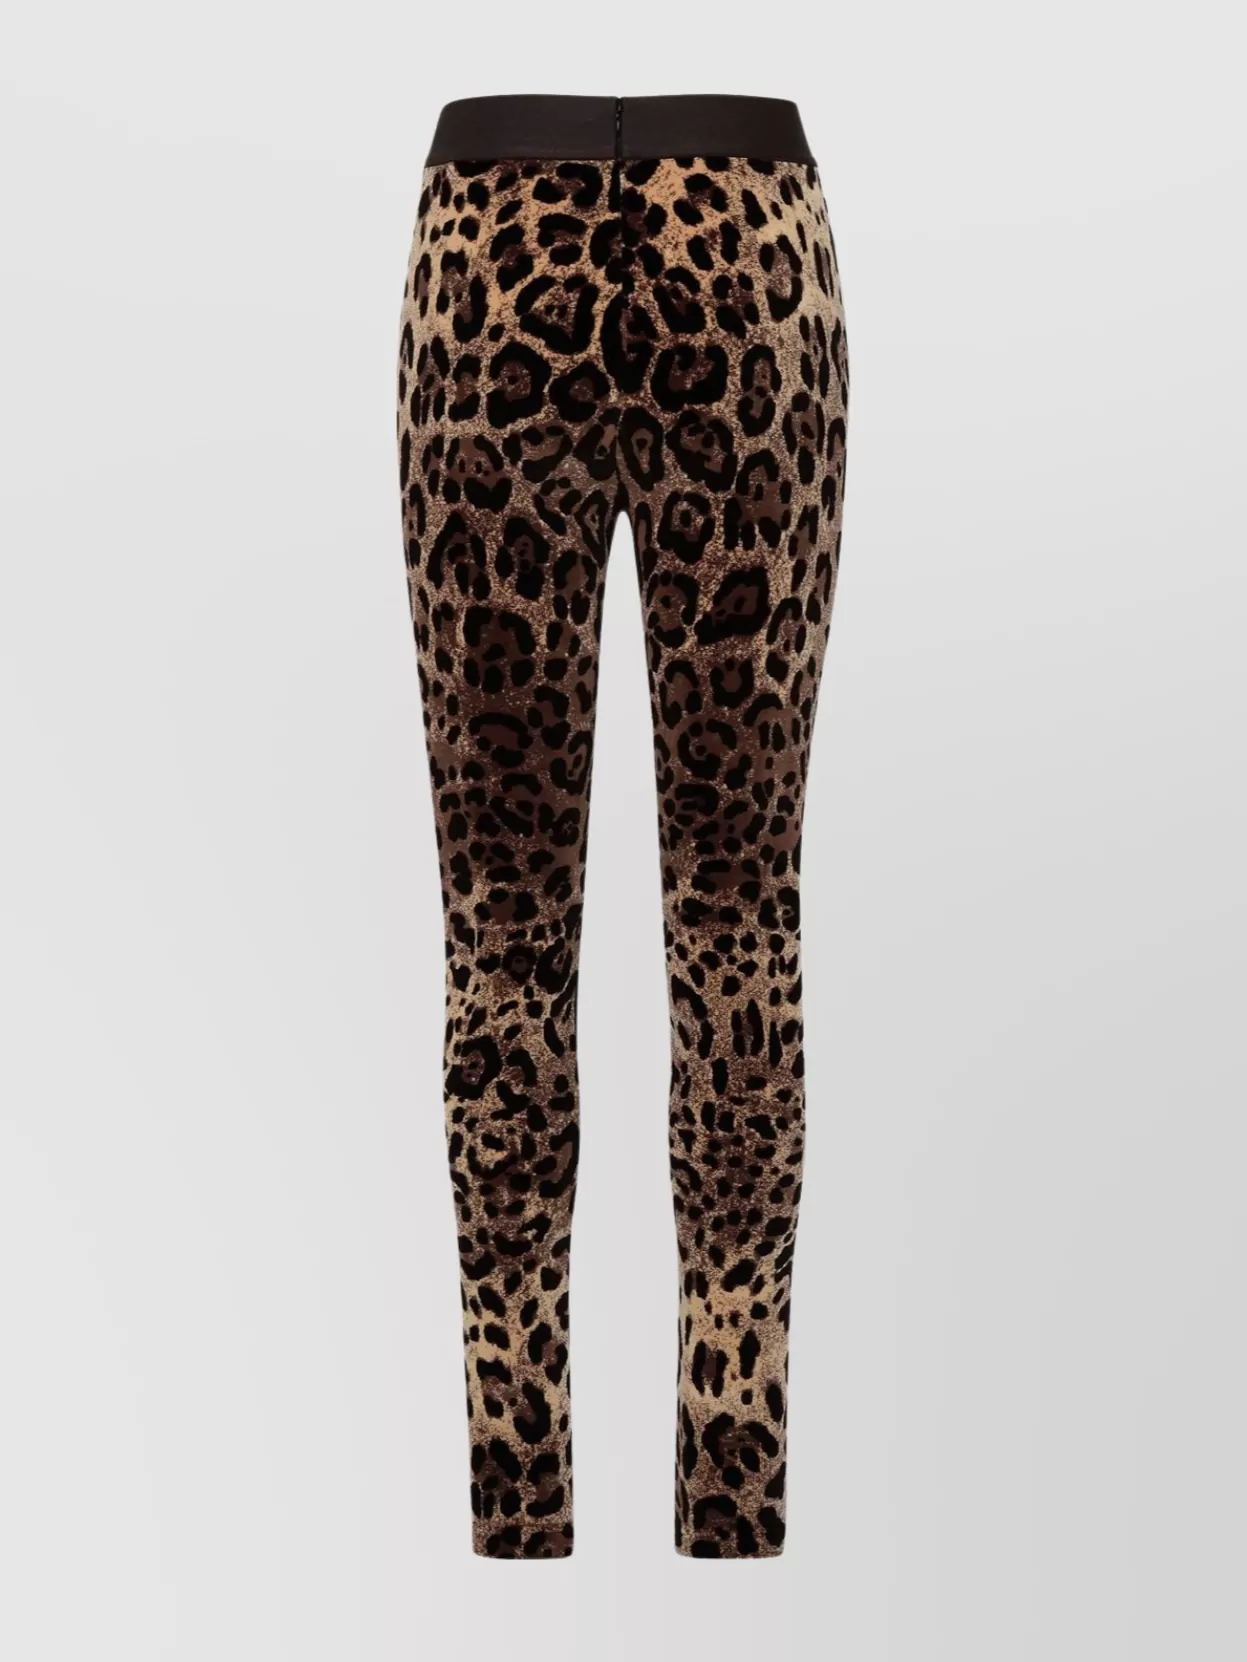 Dolce & Gabbana Fitted Silhouette Animal Print Leggings In Brown